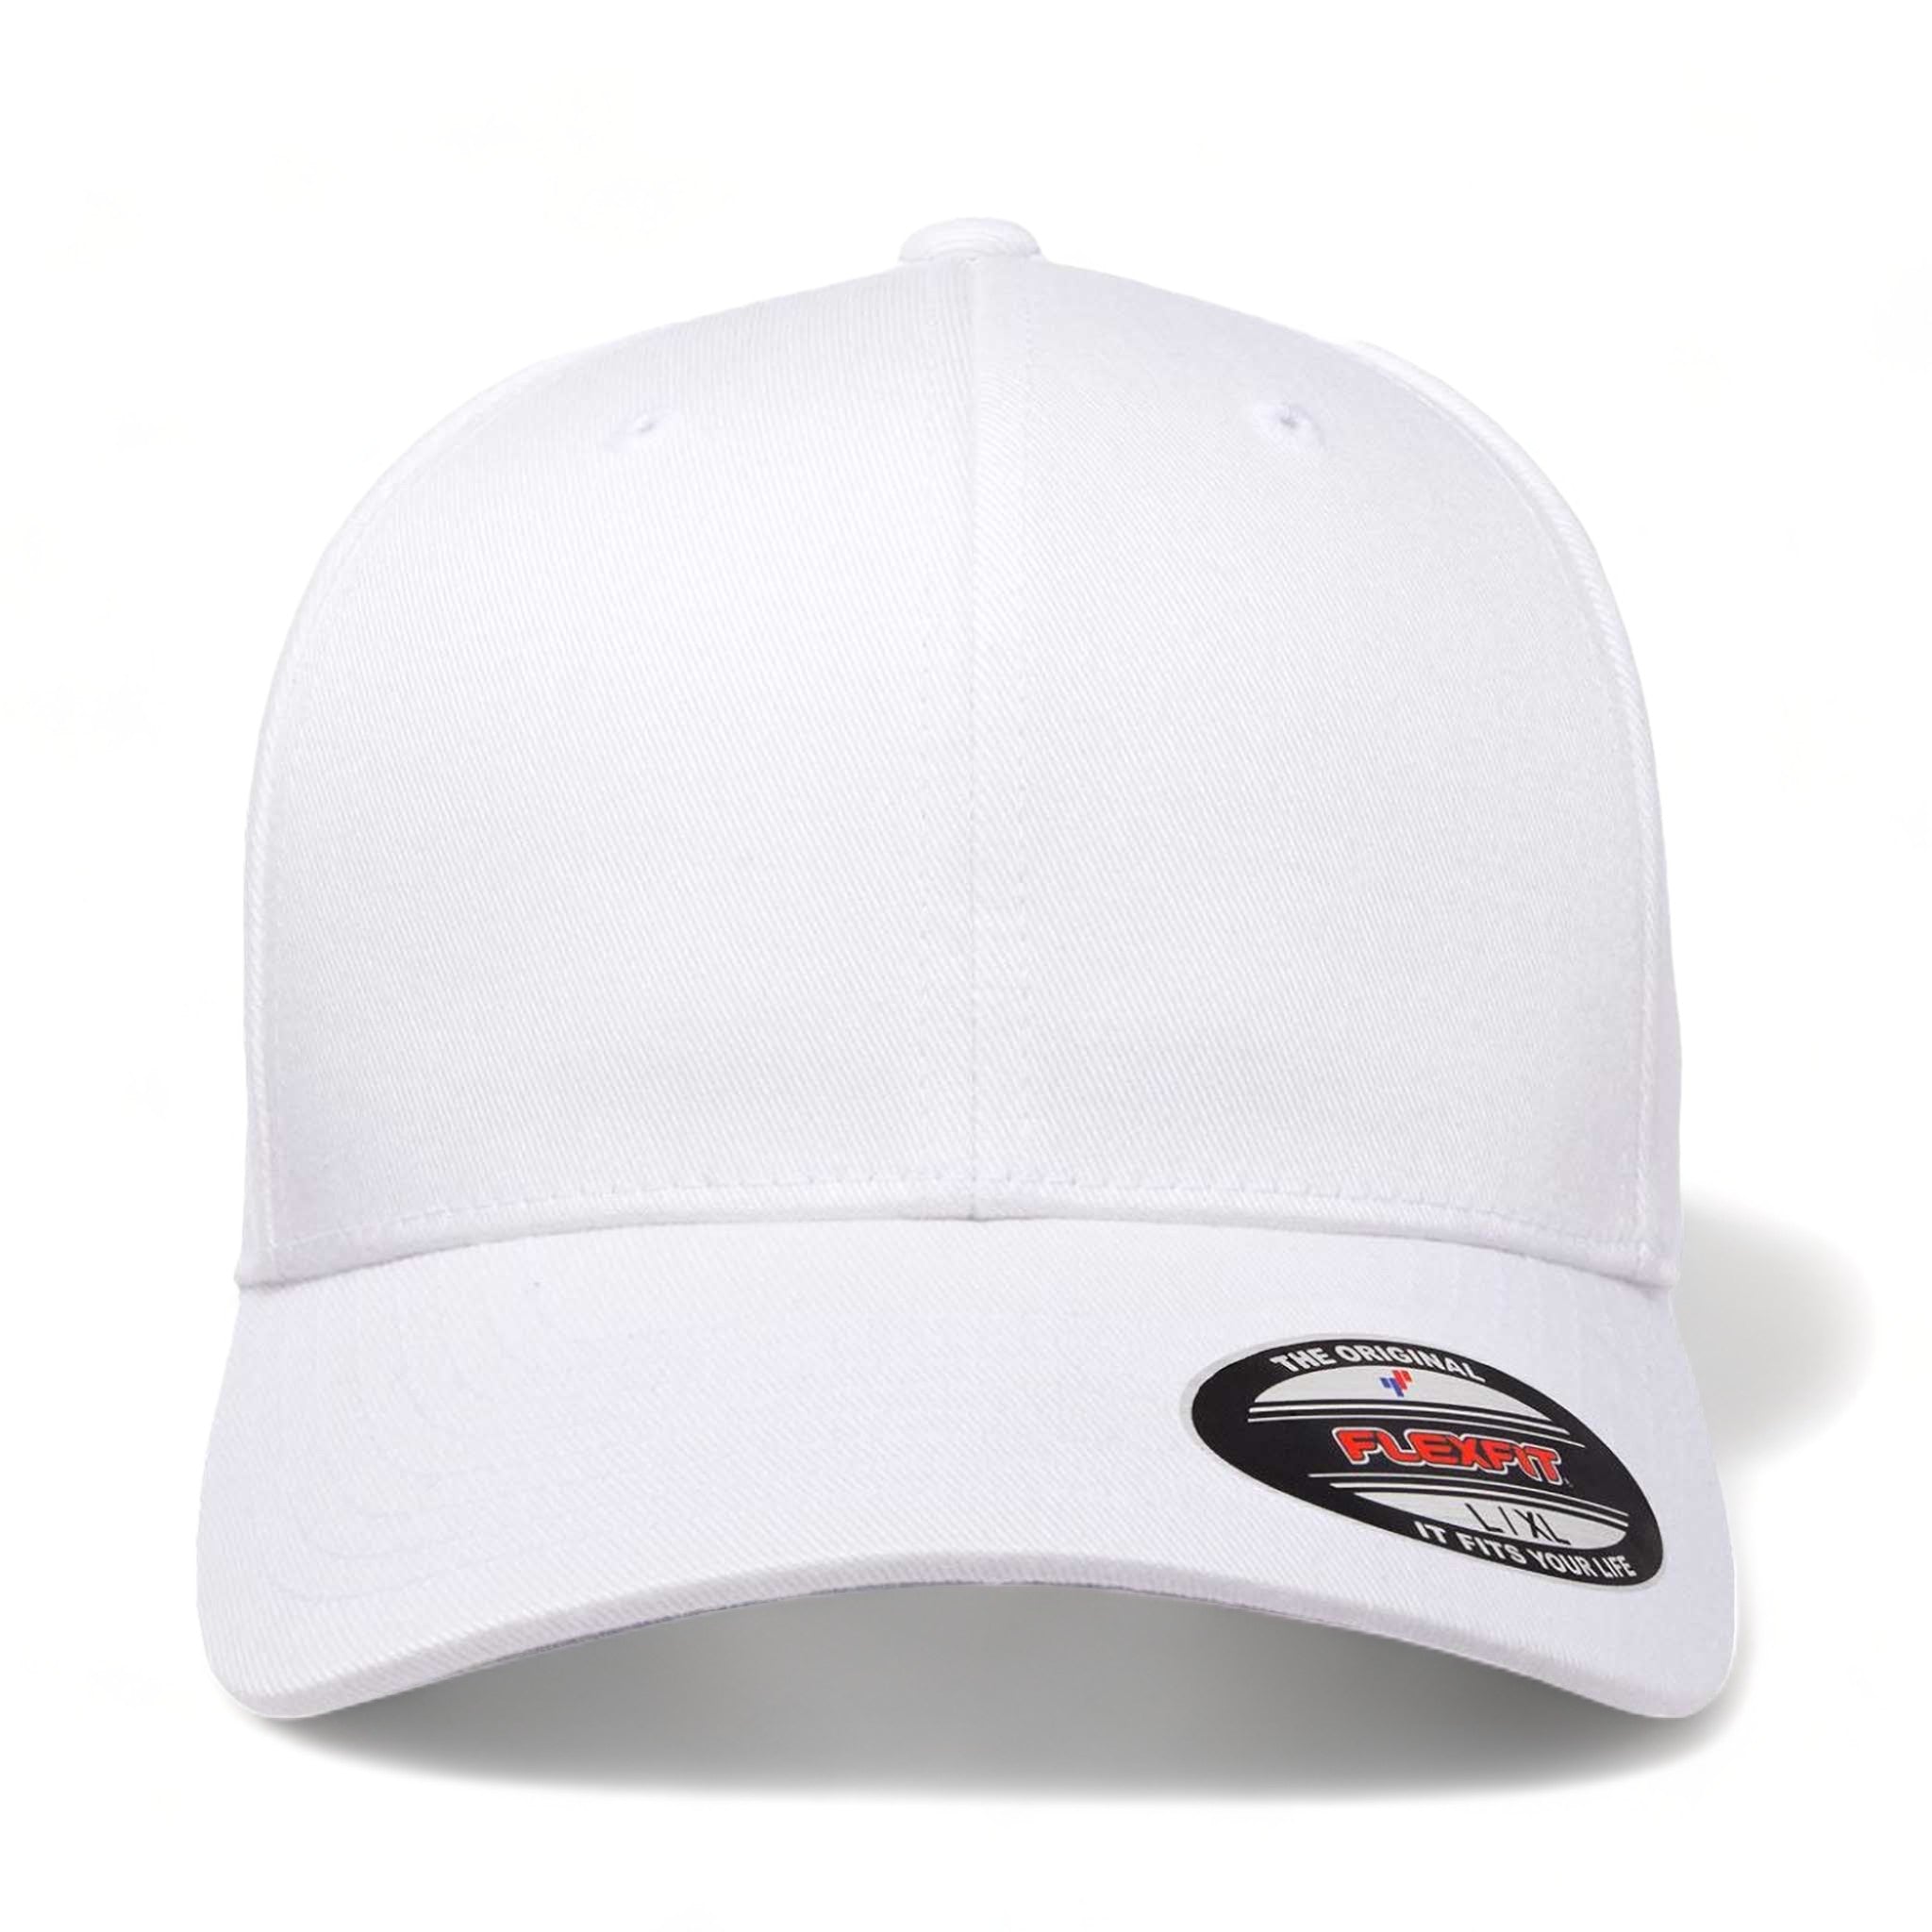 Front view of Flexfit 6277 custom hat in white